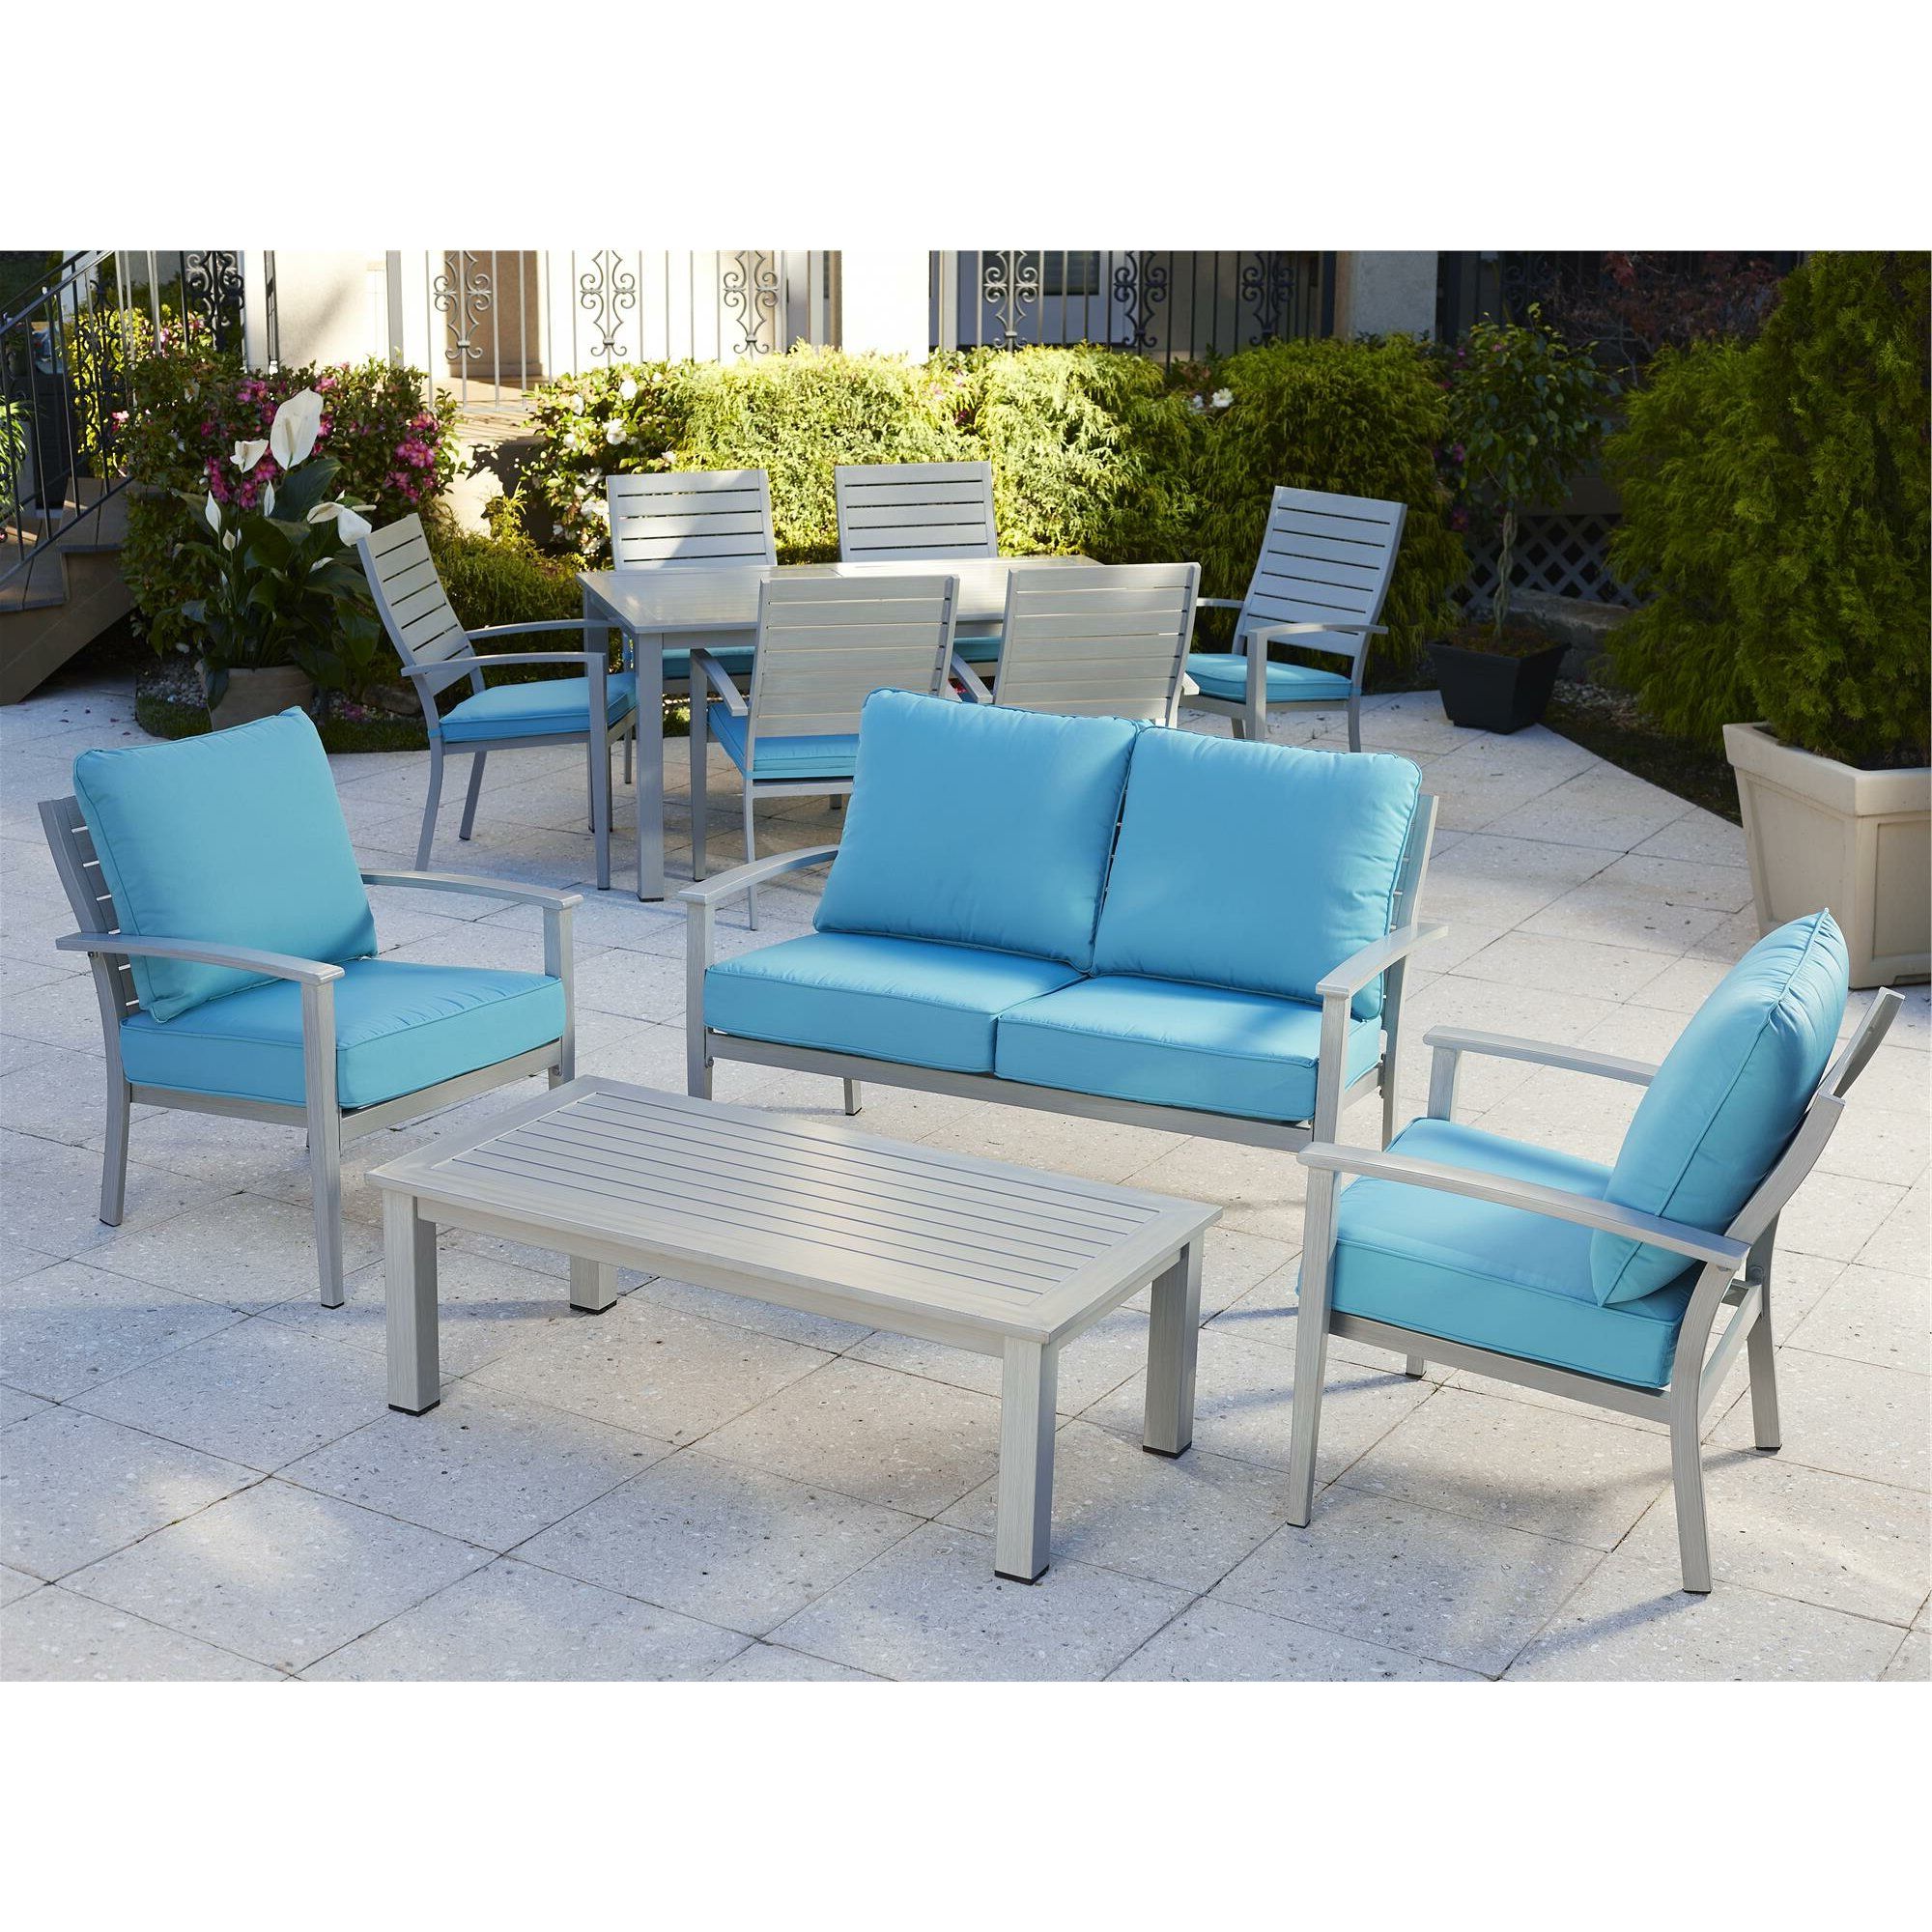 Sky Blue Outdoor Seating Patio Sets Pertaining To Well Known Outdoor Brushed Aluminum Patio Furniture 4 Piece Deep Seating Group (View 13 of 15)